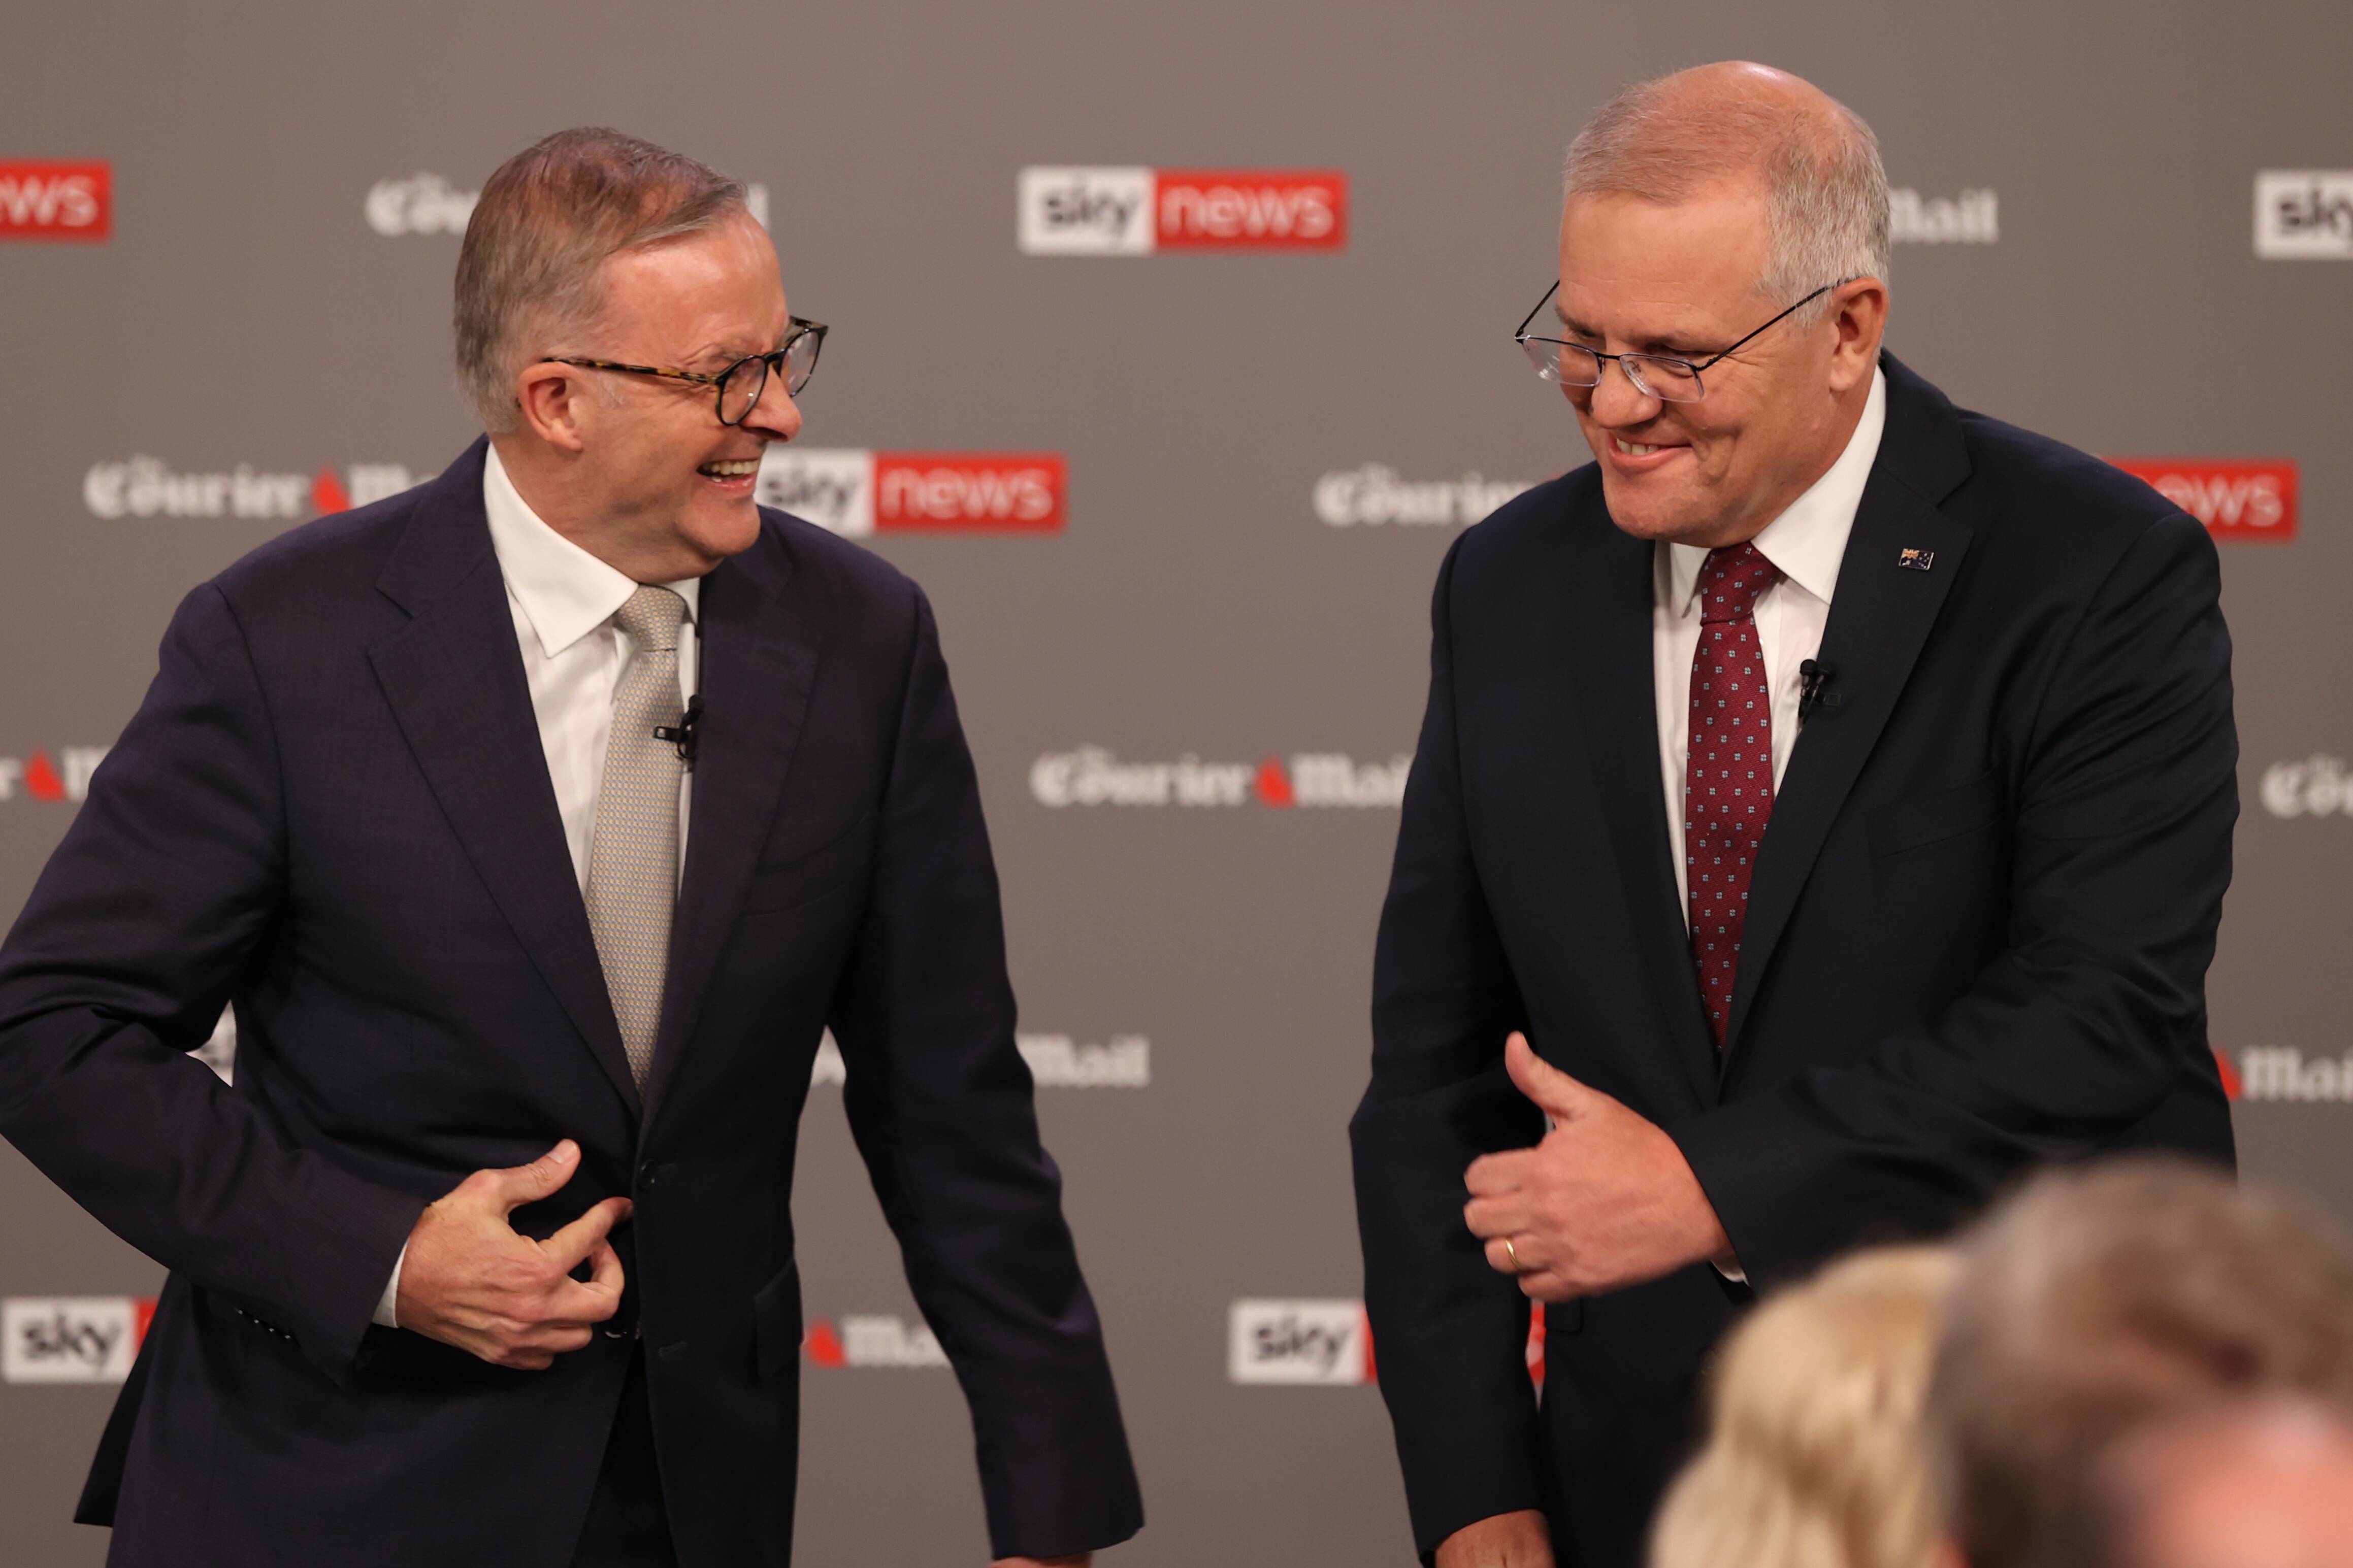 Undecided voters back Anthony Albanese over Scott Morrison as preferred  leader in first election debate | Bega District News | Bega, NSW